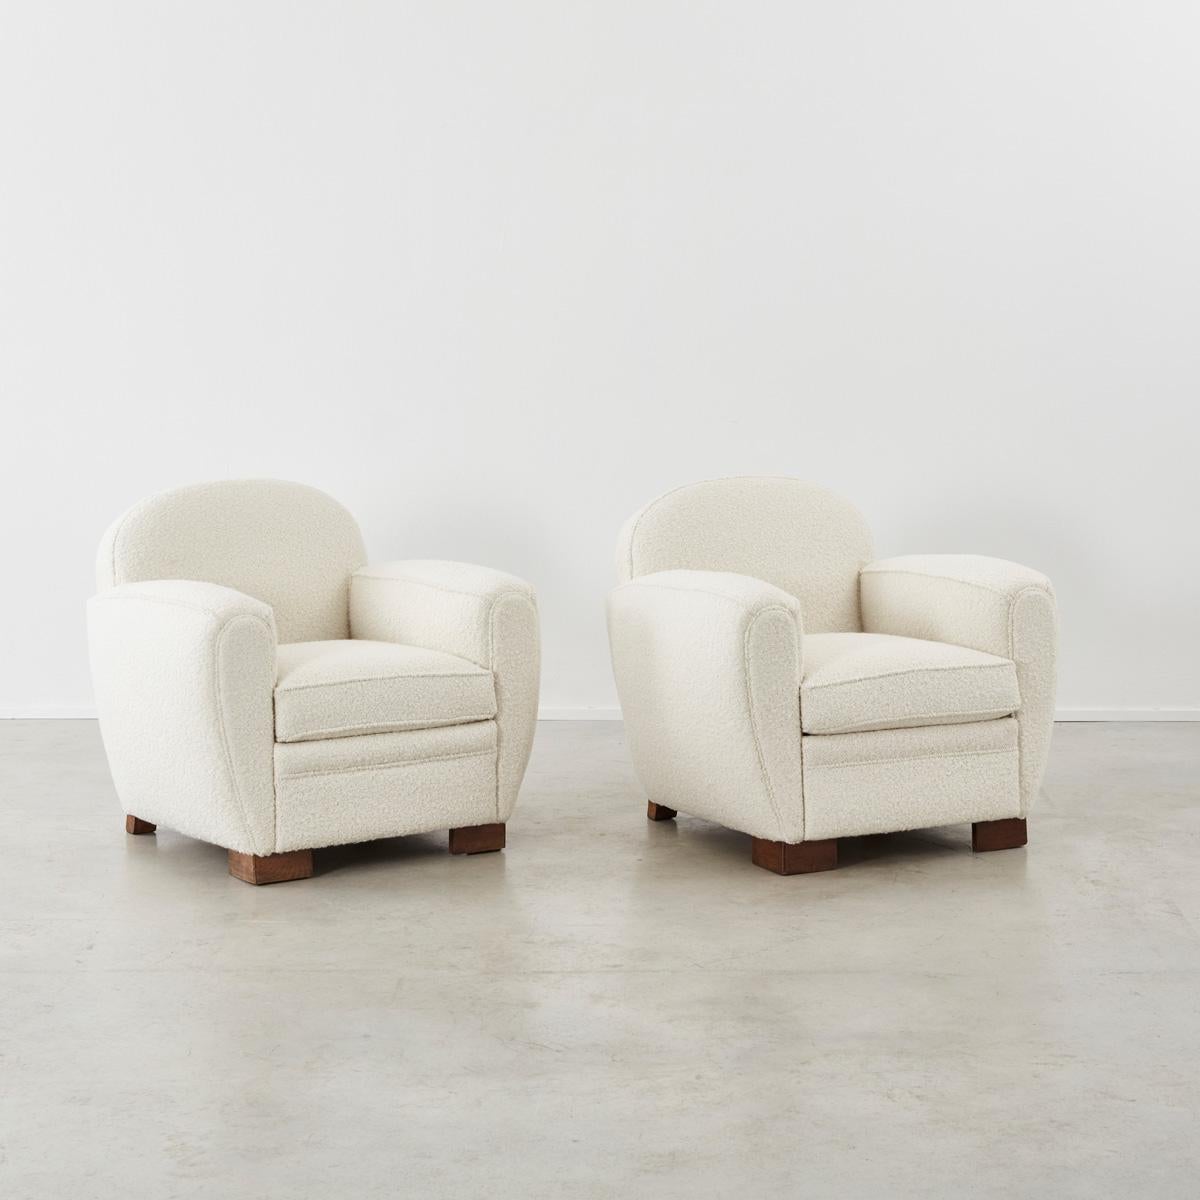 Newly upholstered in pale wool bouclé, these inviting armchairs are reminiscent of Jean-Michel Frank’s ‘modestly luxurious’ designs. Soft curves and comfortable proportions invite loungers to sit down and sink in.

Traditional sprung seats, wooden